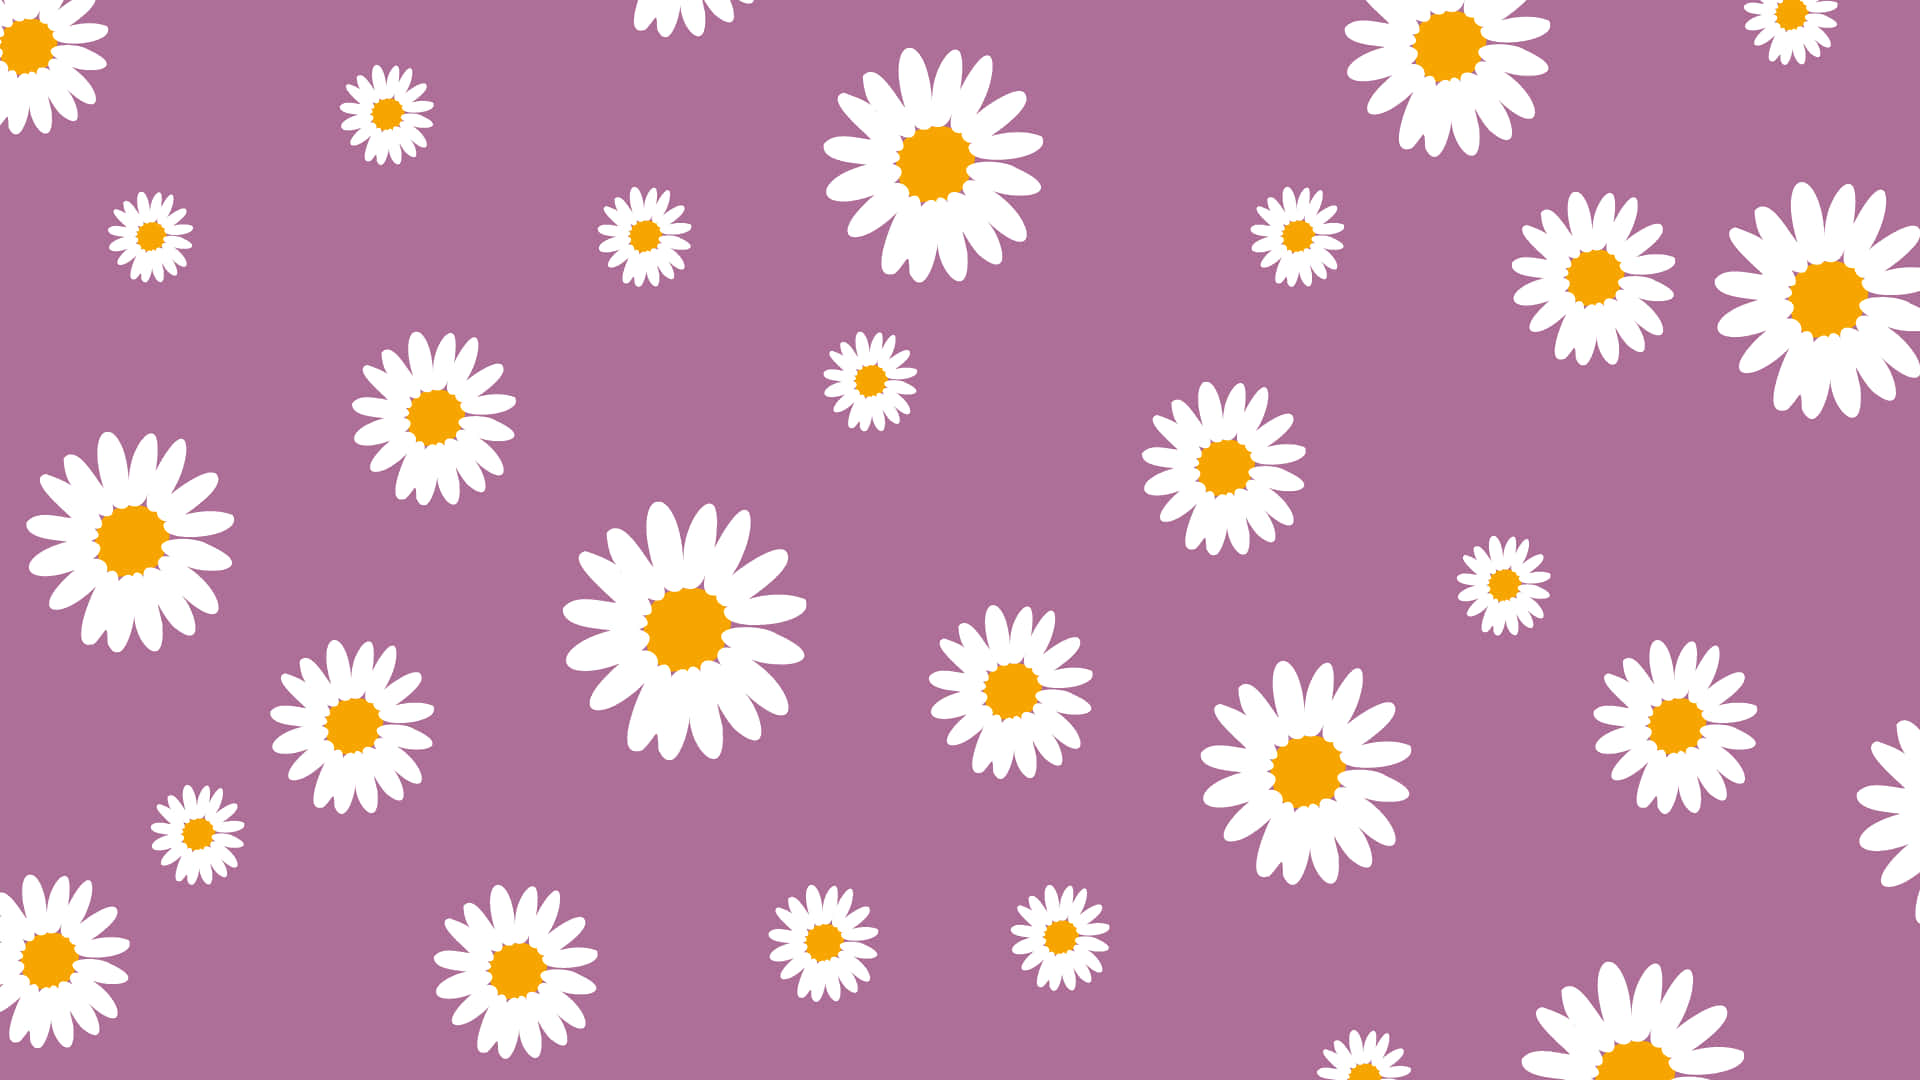 Small Daisies Covering A Pretty Purple Surface